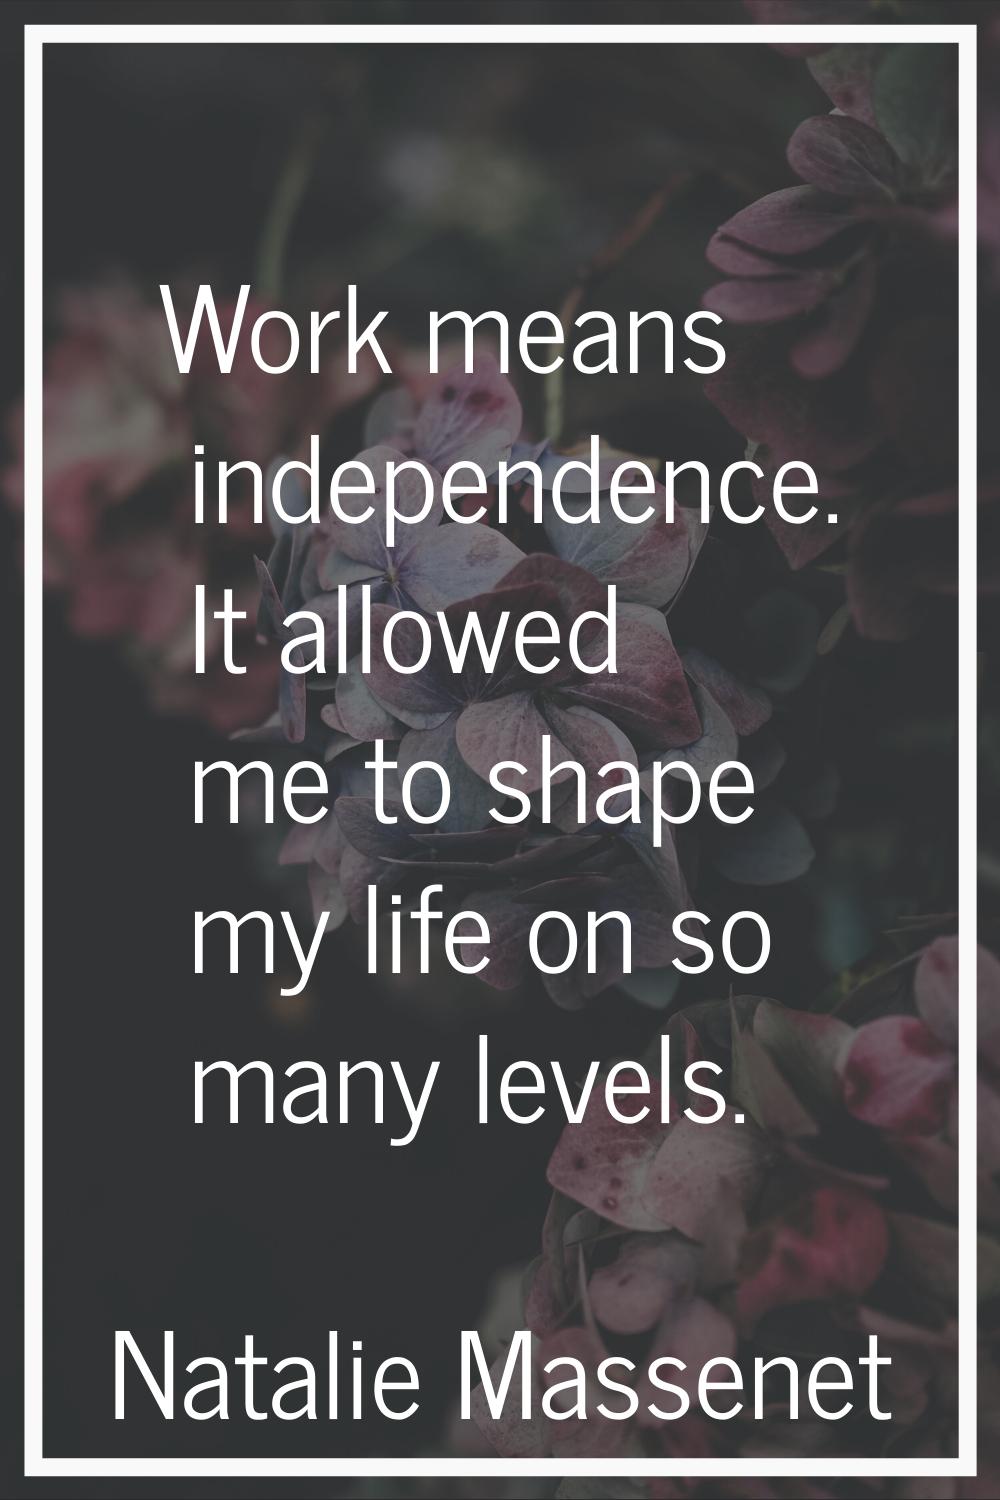 Work means independence. It allowed me to shape my life on so many levels.